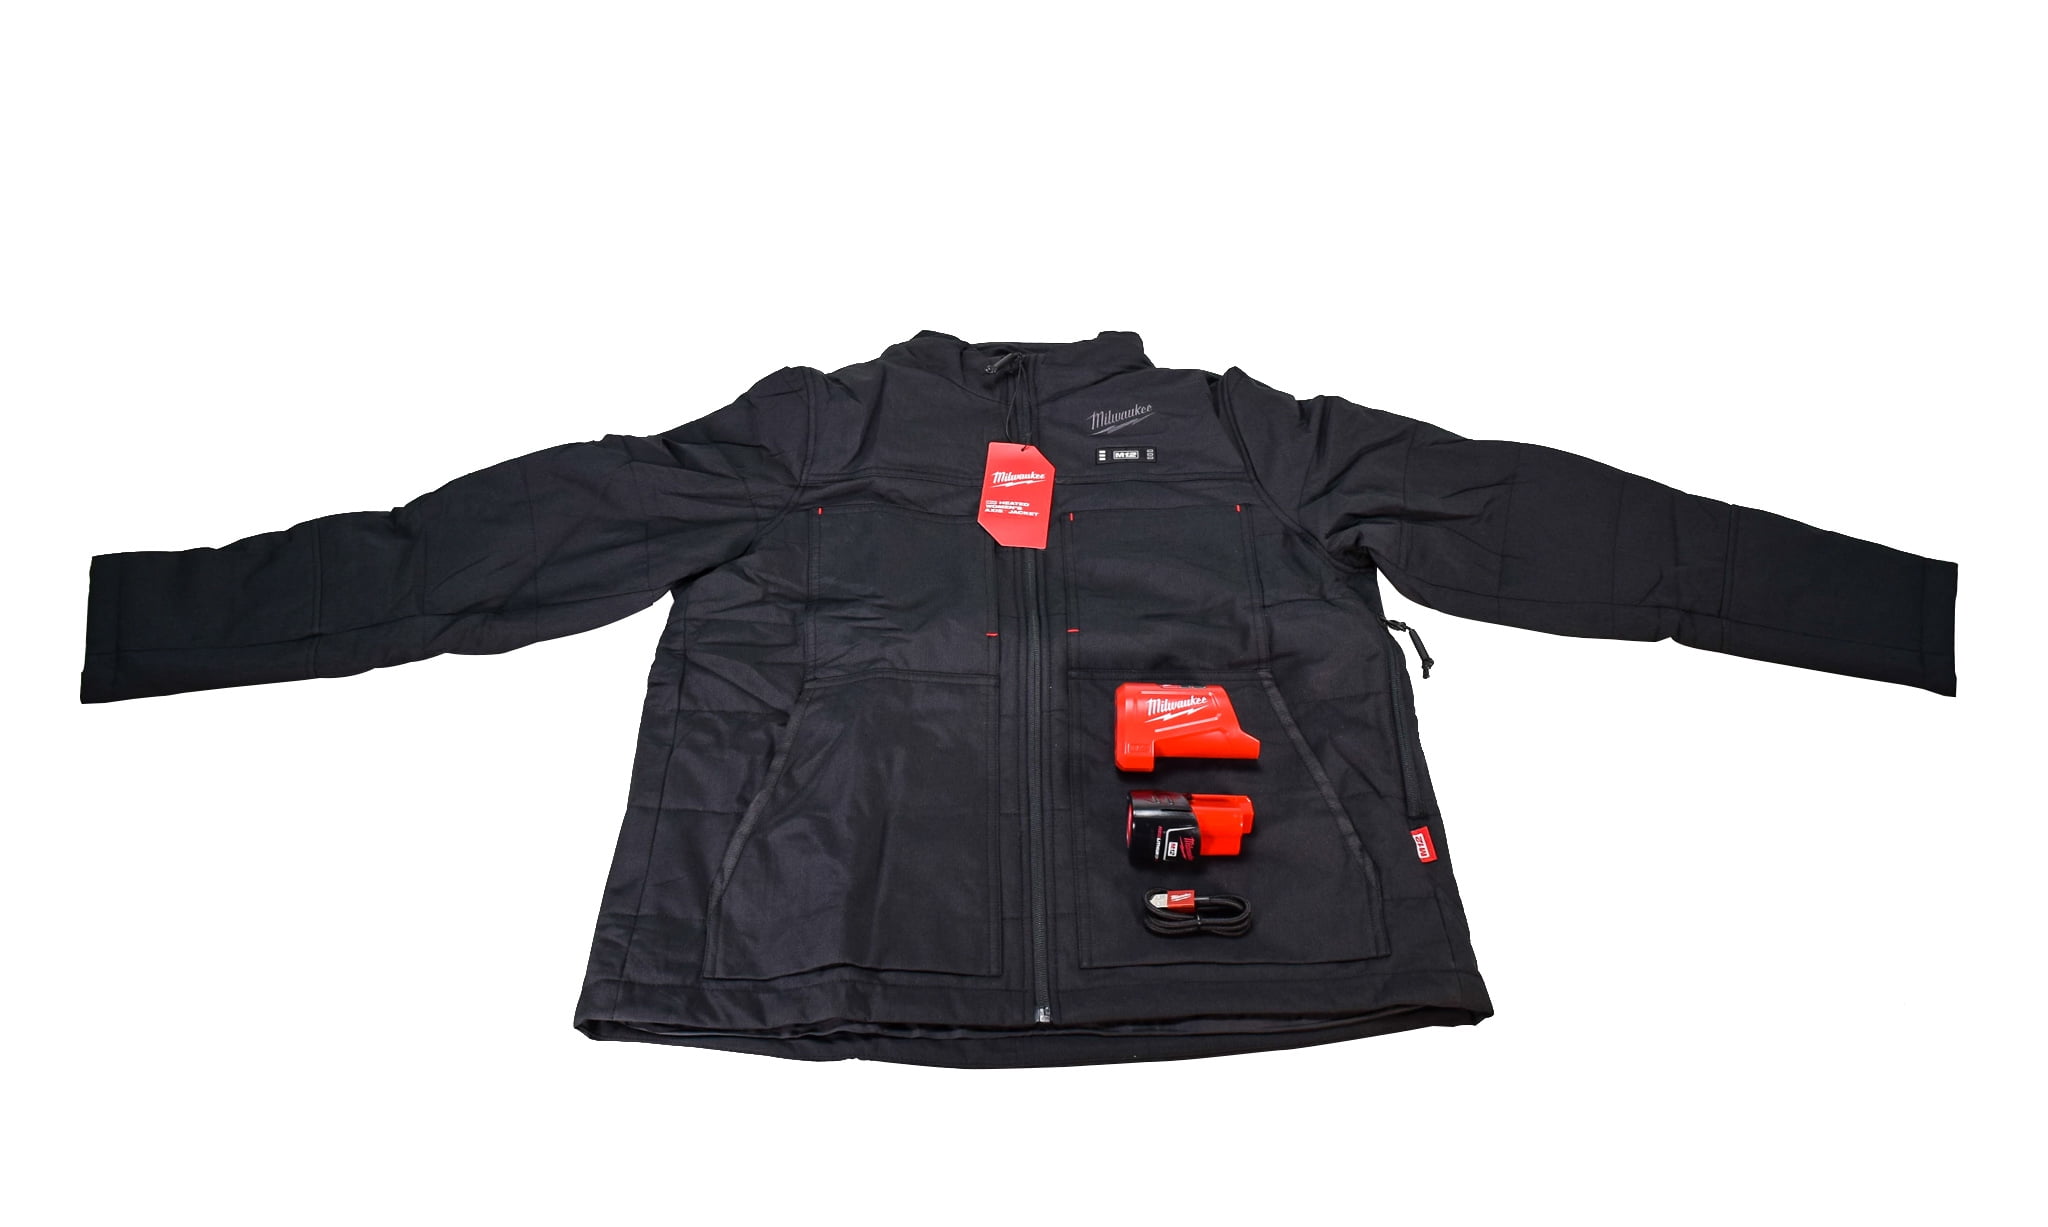 Milwaukee 234B-21L 12V Women's Heated AXIS Jacket Kit Black (Large) with  3.0Ah Lithium Ion Battery  Charger